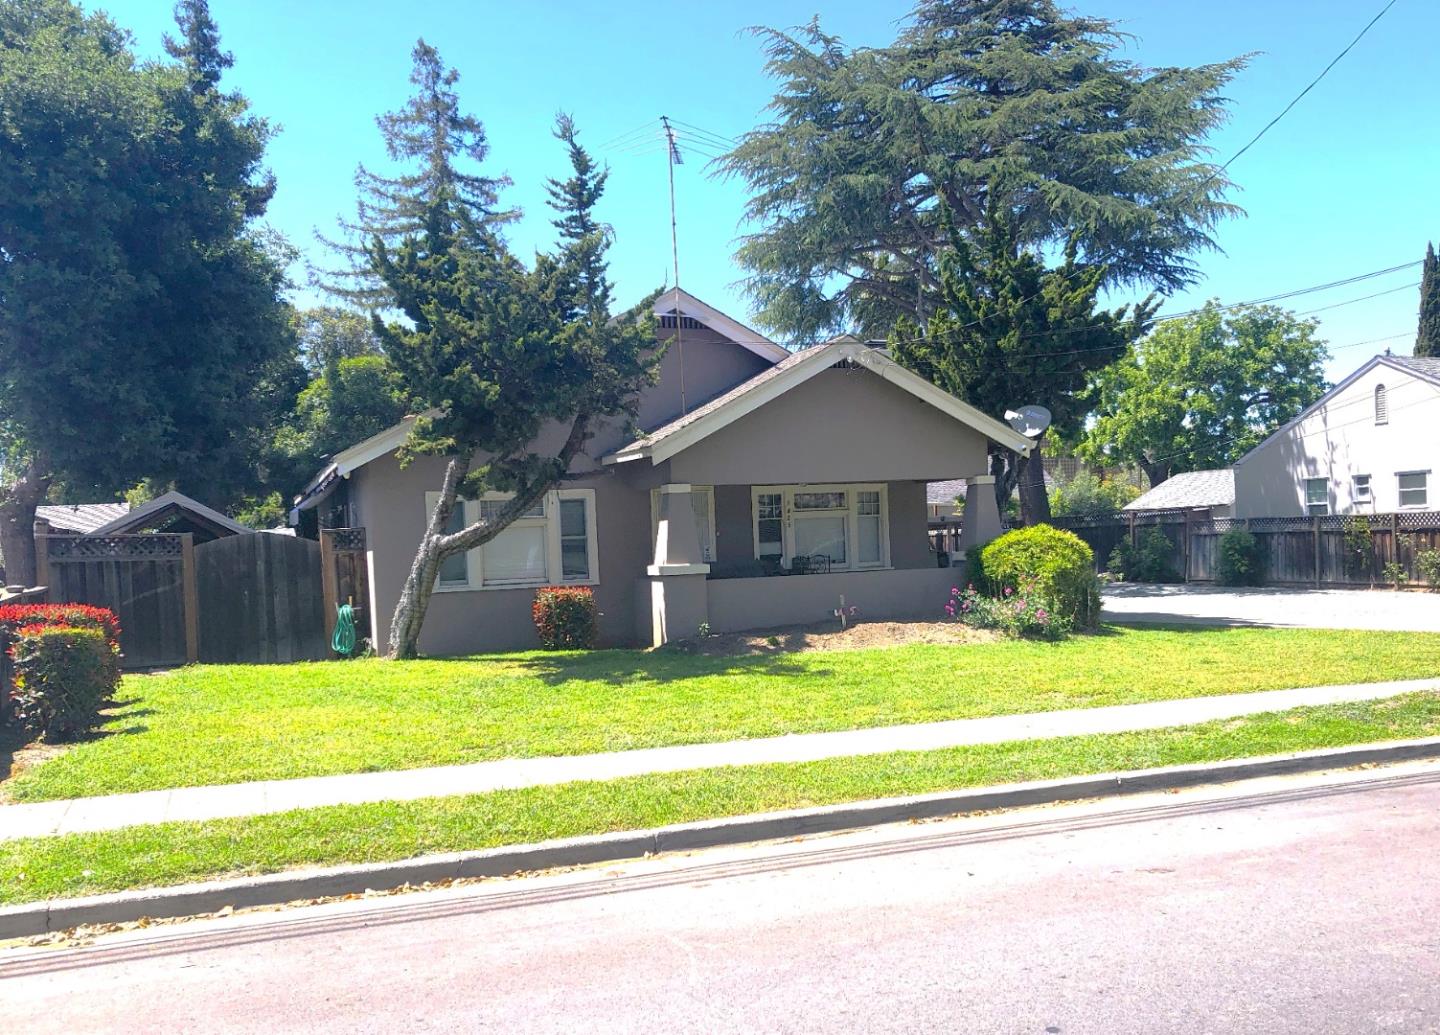 Photo of 1425 Cherry Ave in San Jose, CA